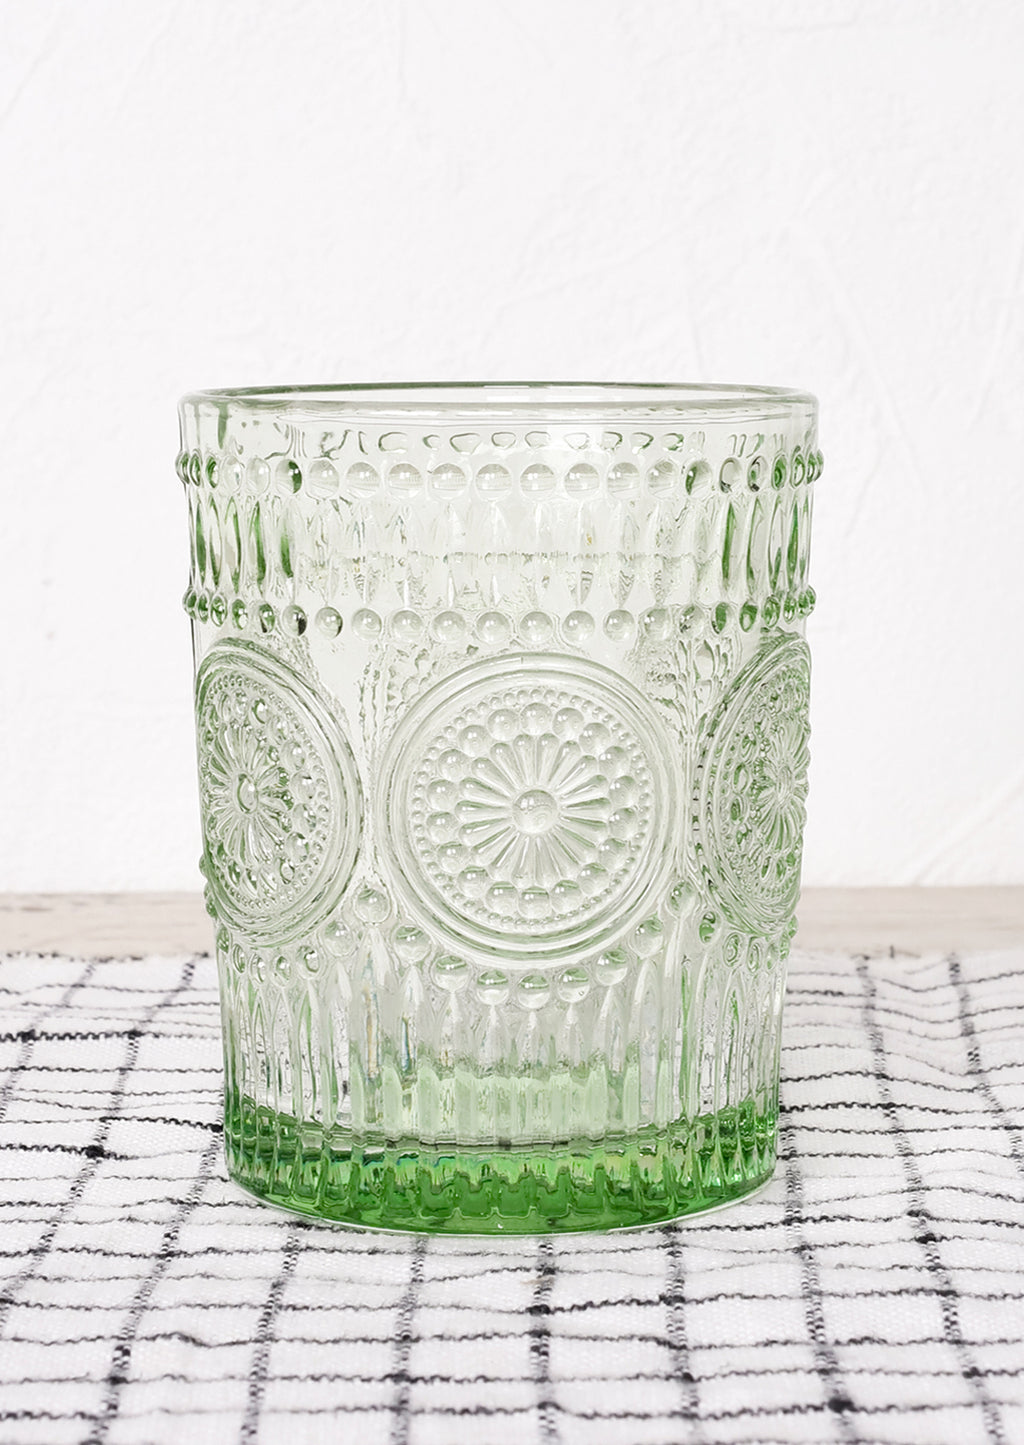 Bottle Green: A green glass cup in embossed design.